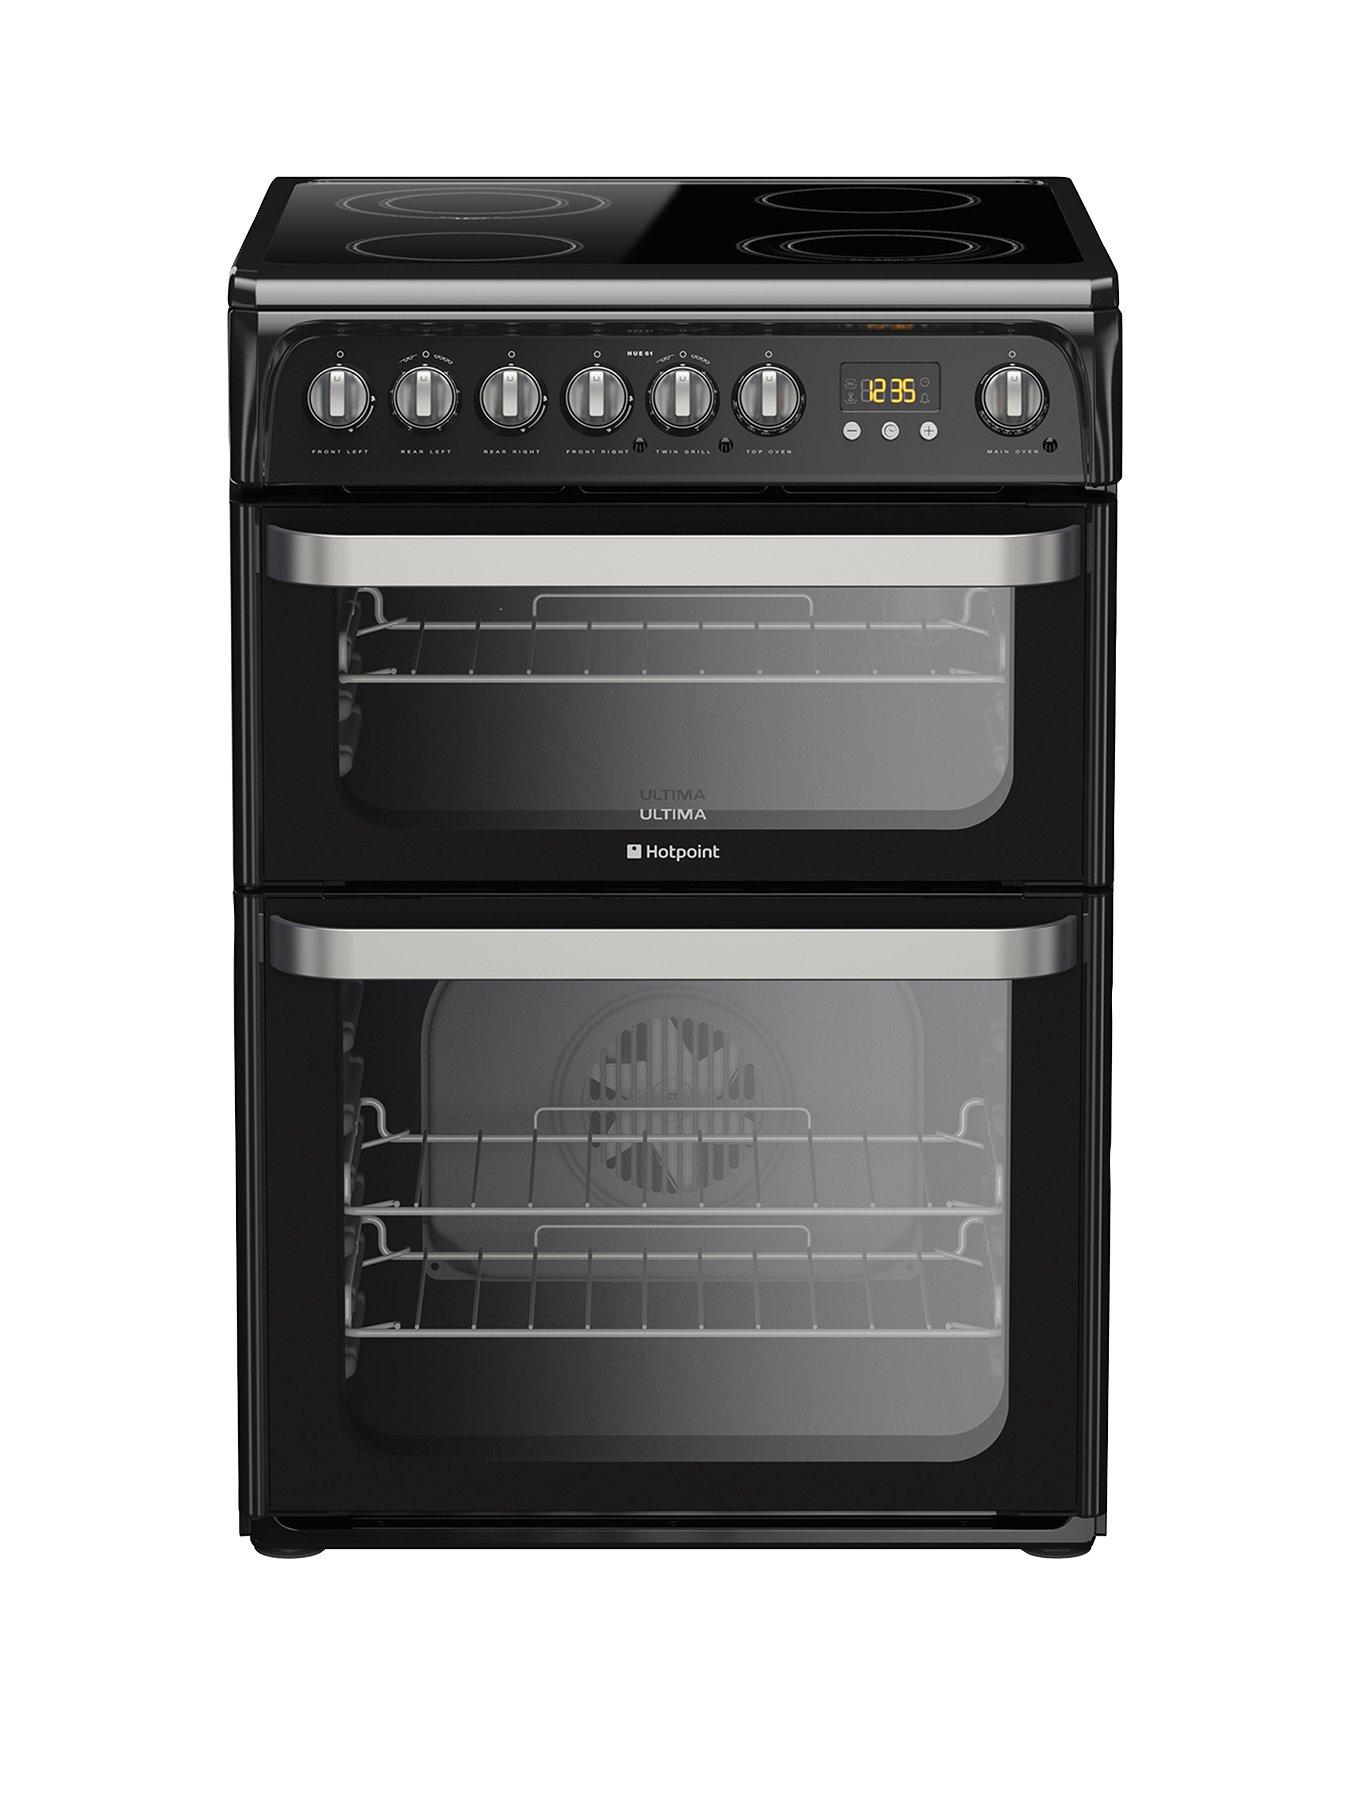 HUE61K 60cm Double Oven Electric Cooker 